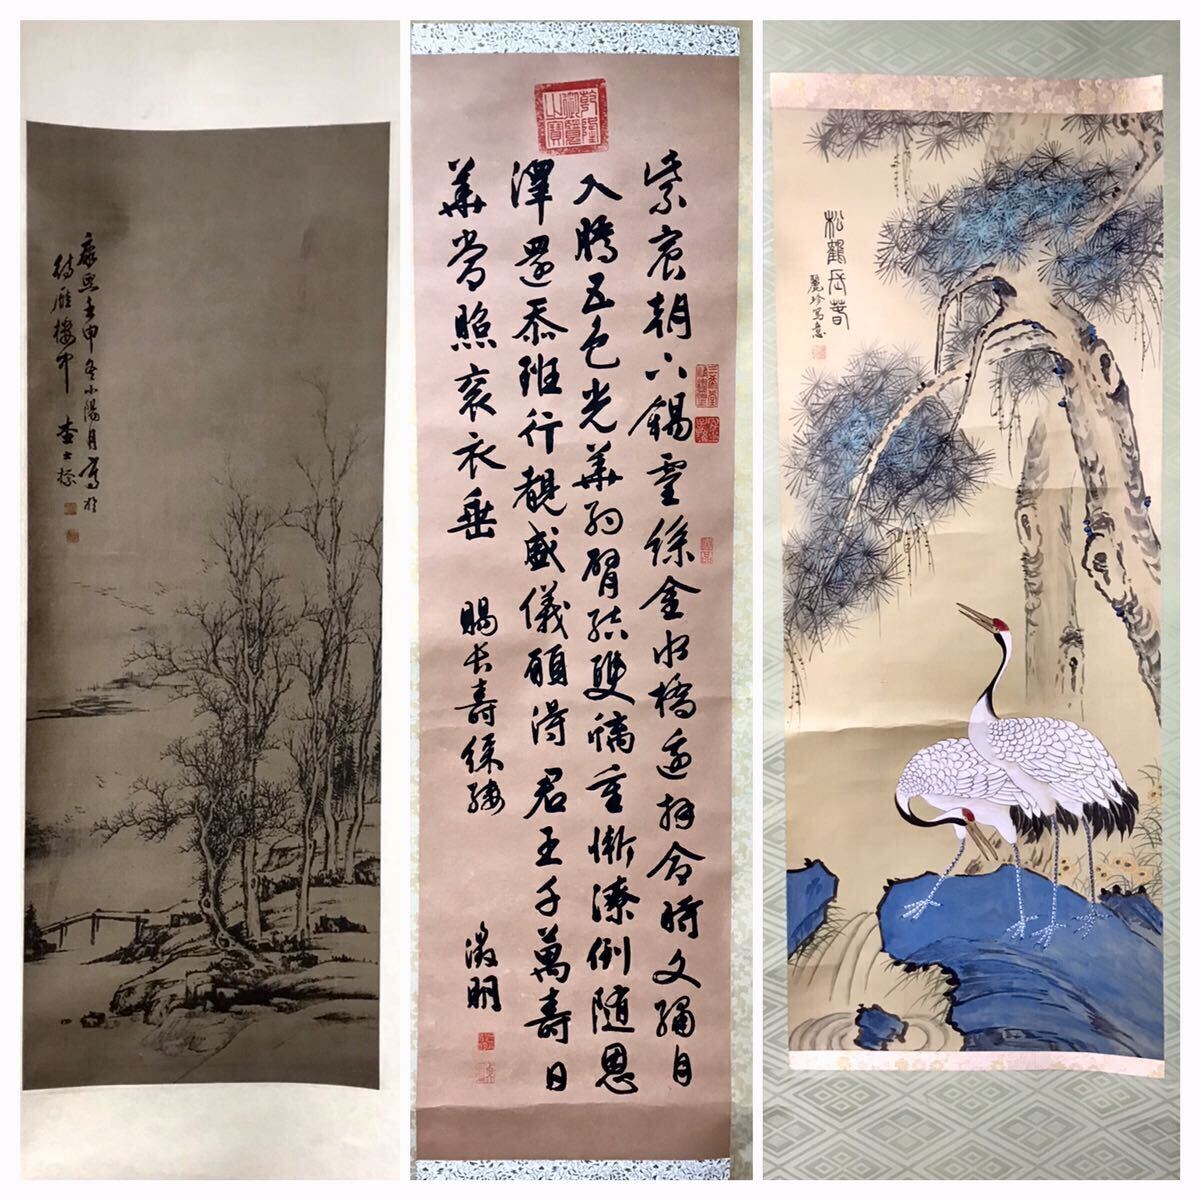  hanging scroll together 235ps.@ and more tree boxed 6 2 ps large amount exhibition antique goods copy .. Japanese picture China flowers and birds landscape beauty picture paper portrait painting .. axis old fine art various 